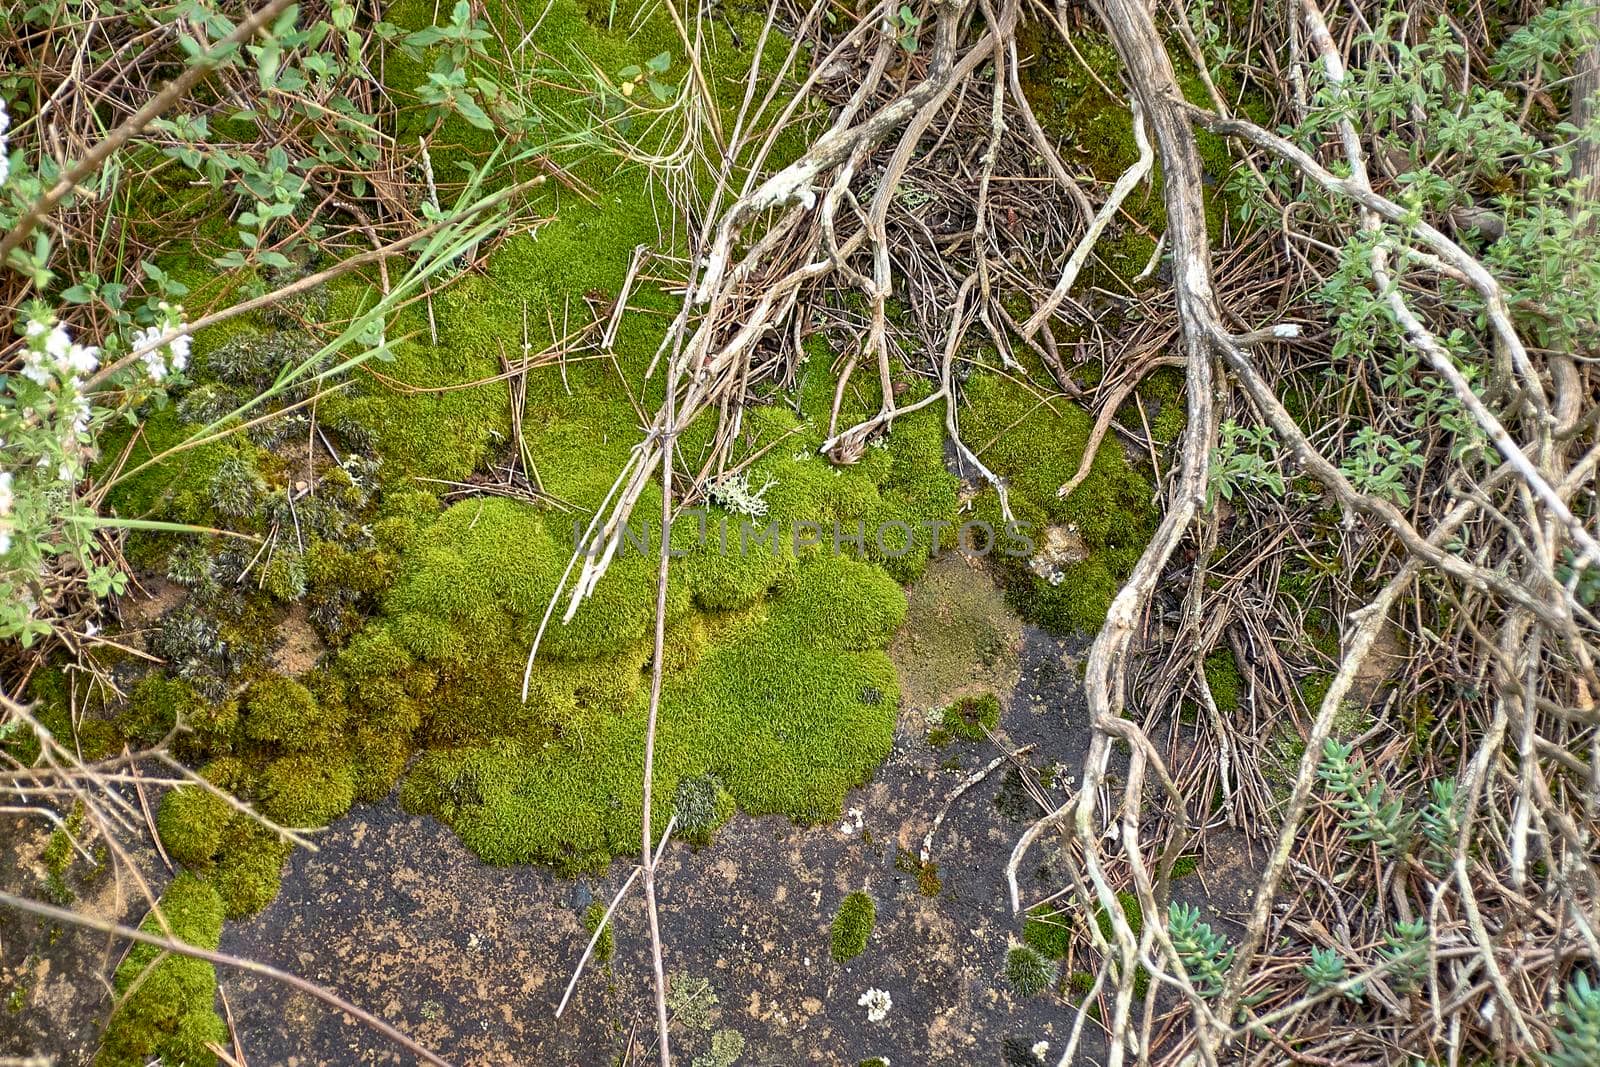 Rock full of moss and surrounded by roots. Top view, out of focus background, dry roots, macro photography.